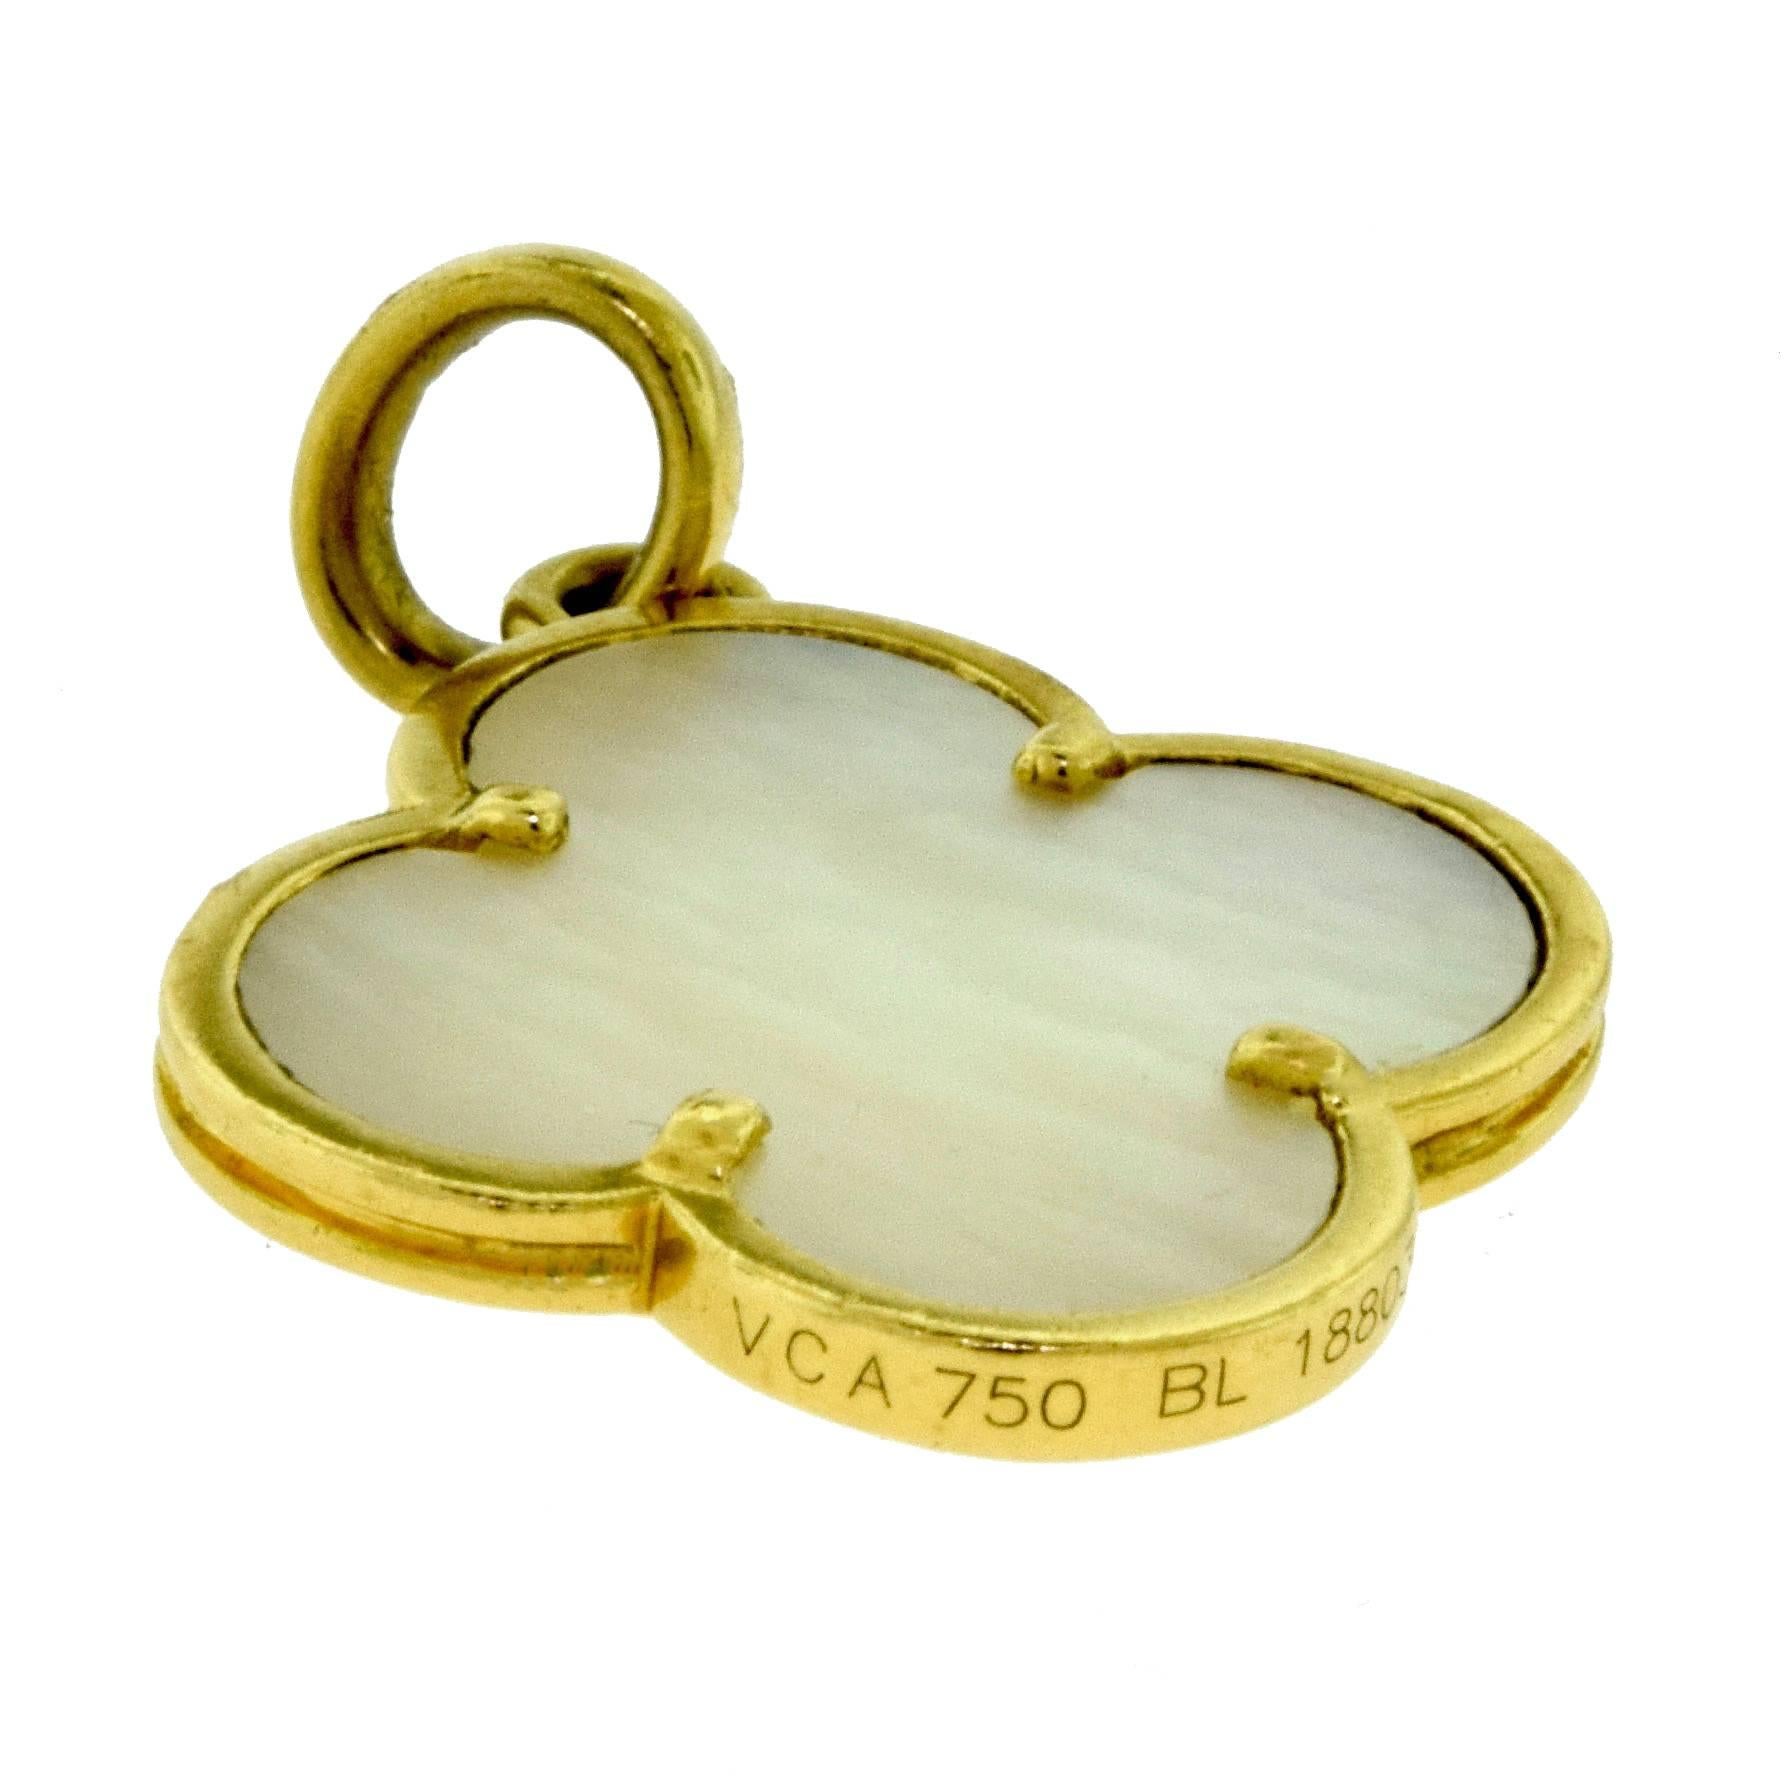 Designer: Van Cleef & Arpels
Collection: Magic Alhambra
Metal: Yellow Gold
Metal Purity: 18k
Stones: Mother of Pearl
Total Item Weight (g): 4.5
Dimensions: 19.23 x 22.45 mm
Thickness: 2.243 mm
Hallmark: VCA 750 Serial No.​​​​​​​

Created in 2006 by